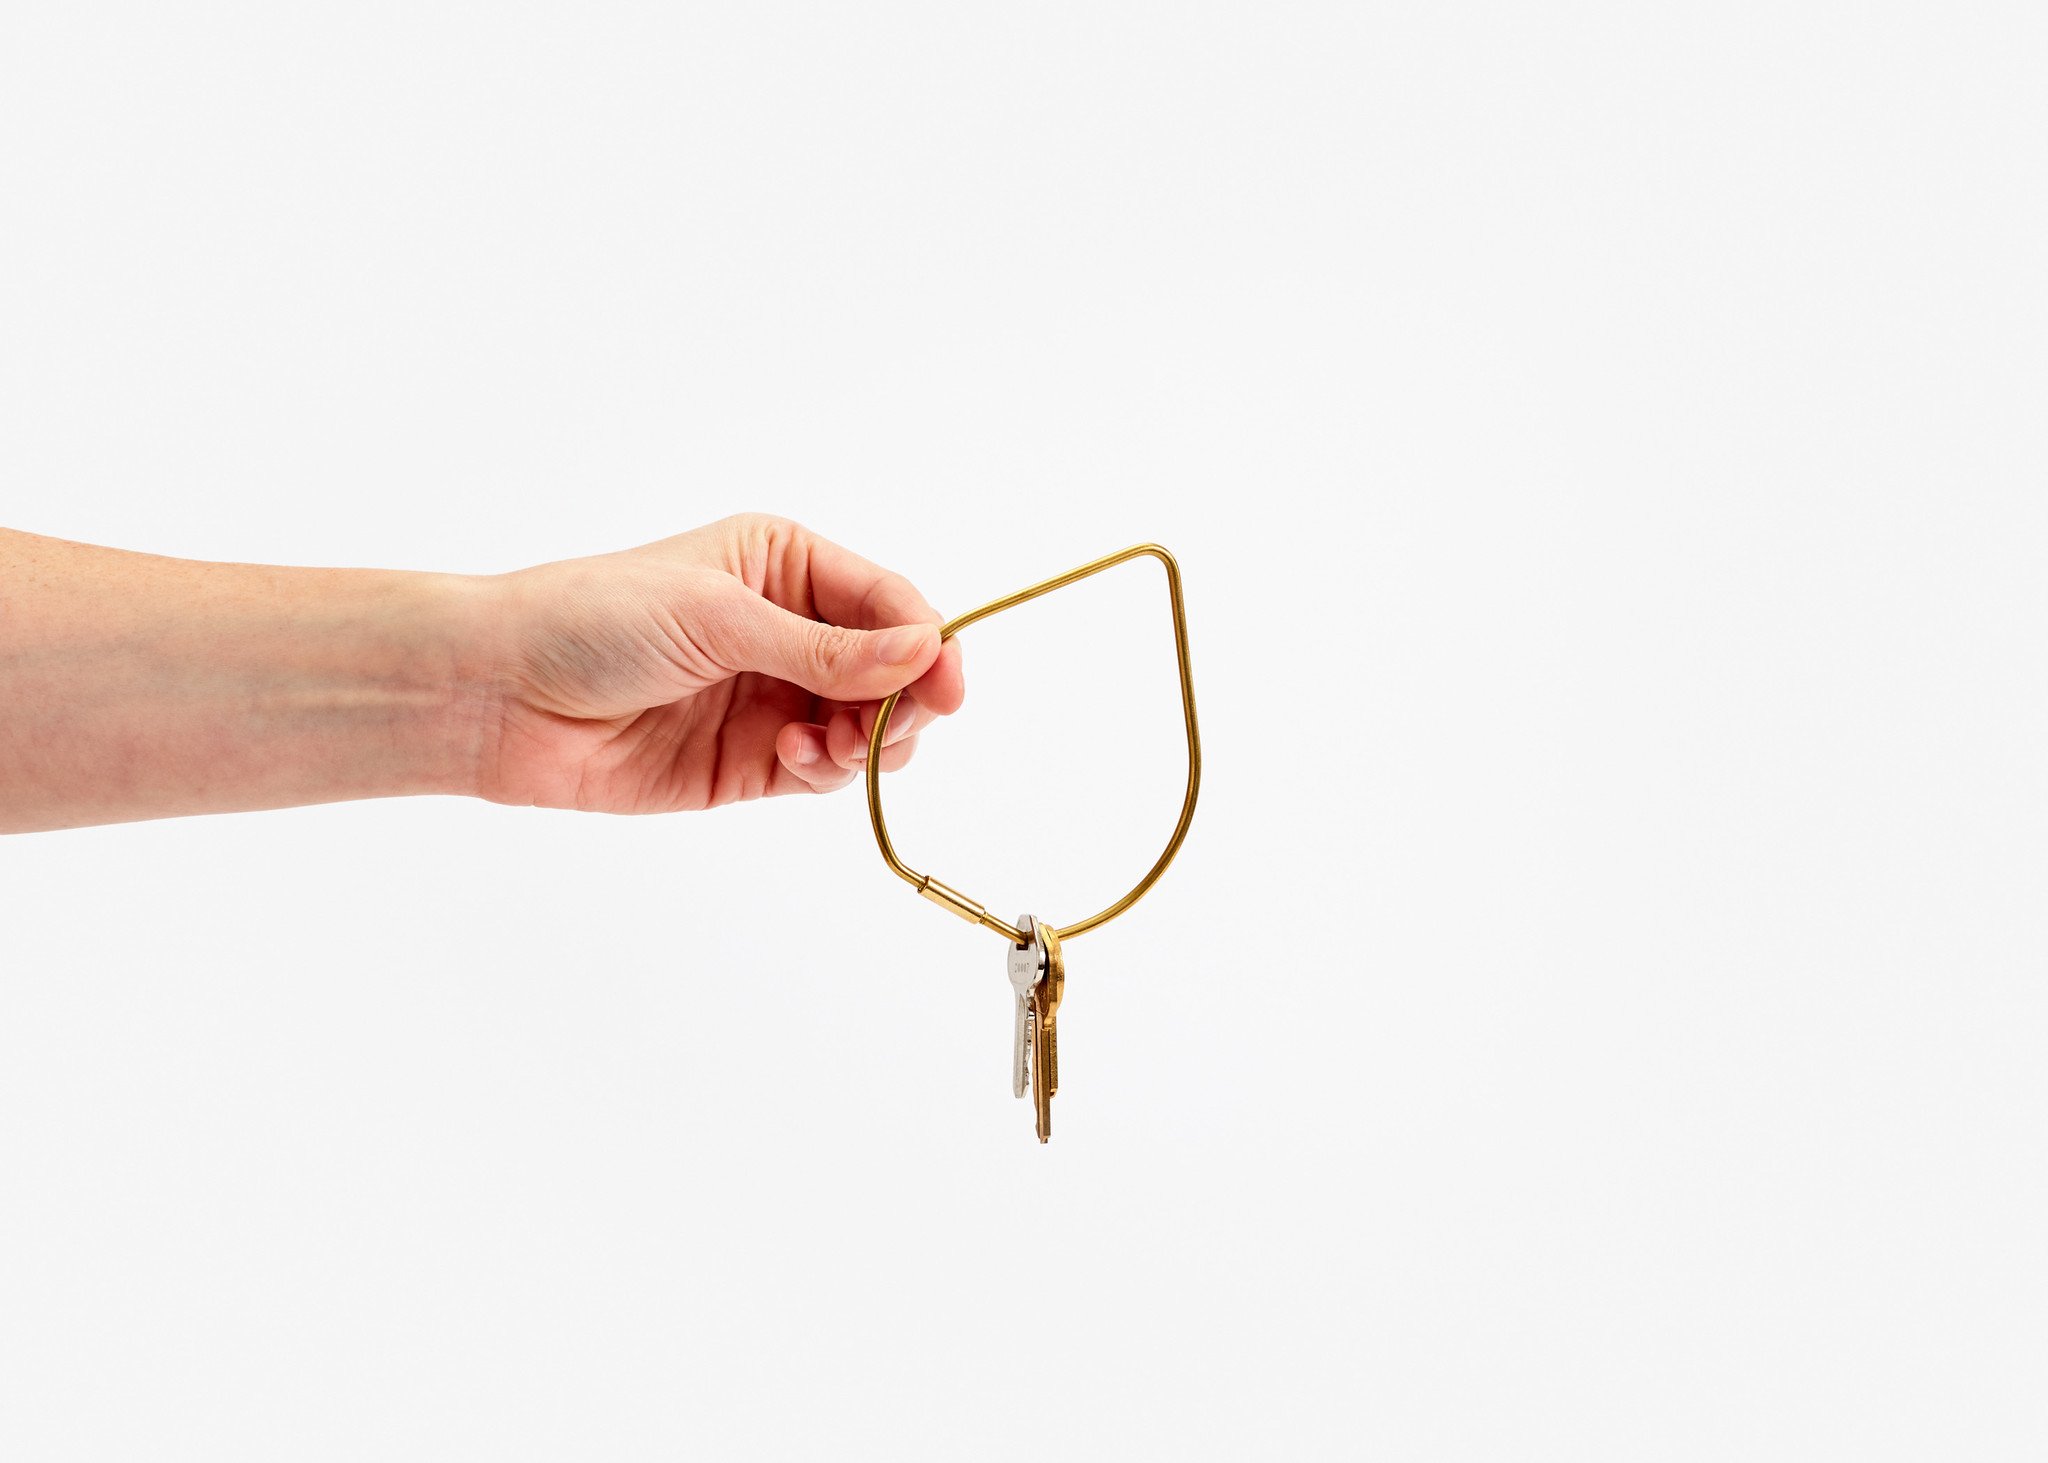 a hand holding a tear drop shaped key ring in front of a white background